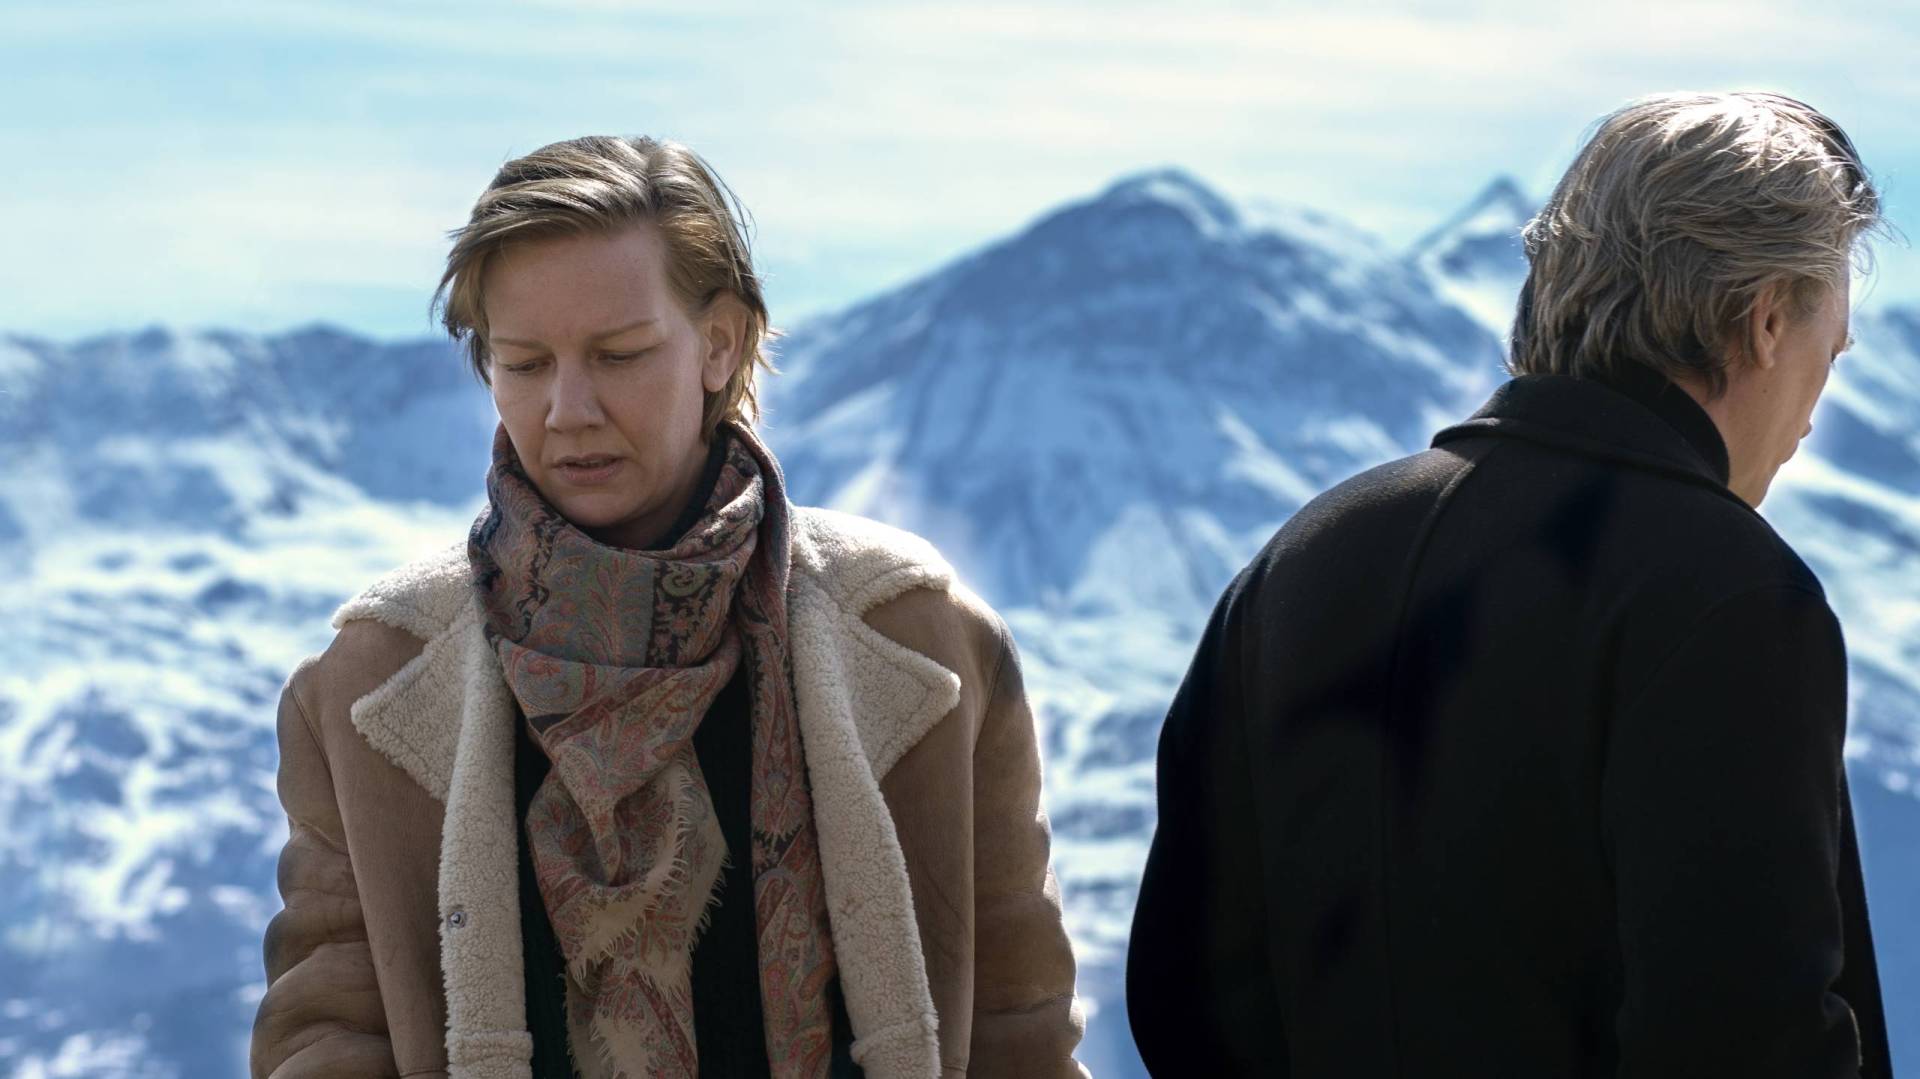 A white woman stands wearing warm clothing, a snow-capped mountain in the distance. A man is at her side, turned away from her.